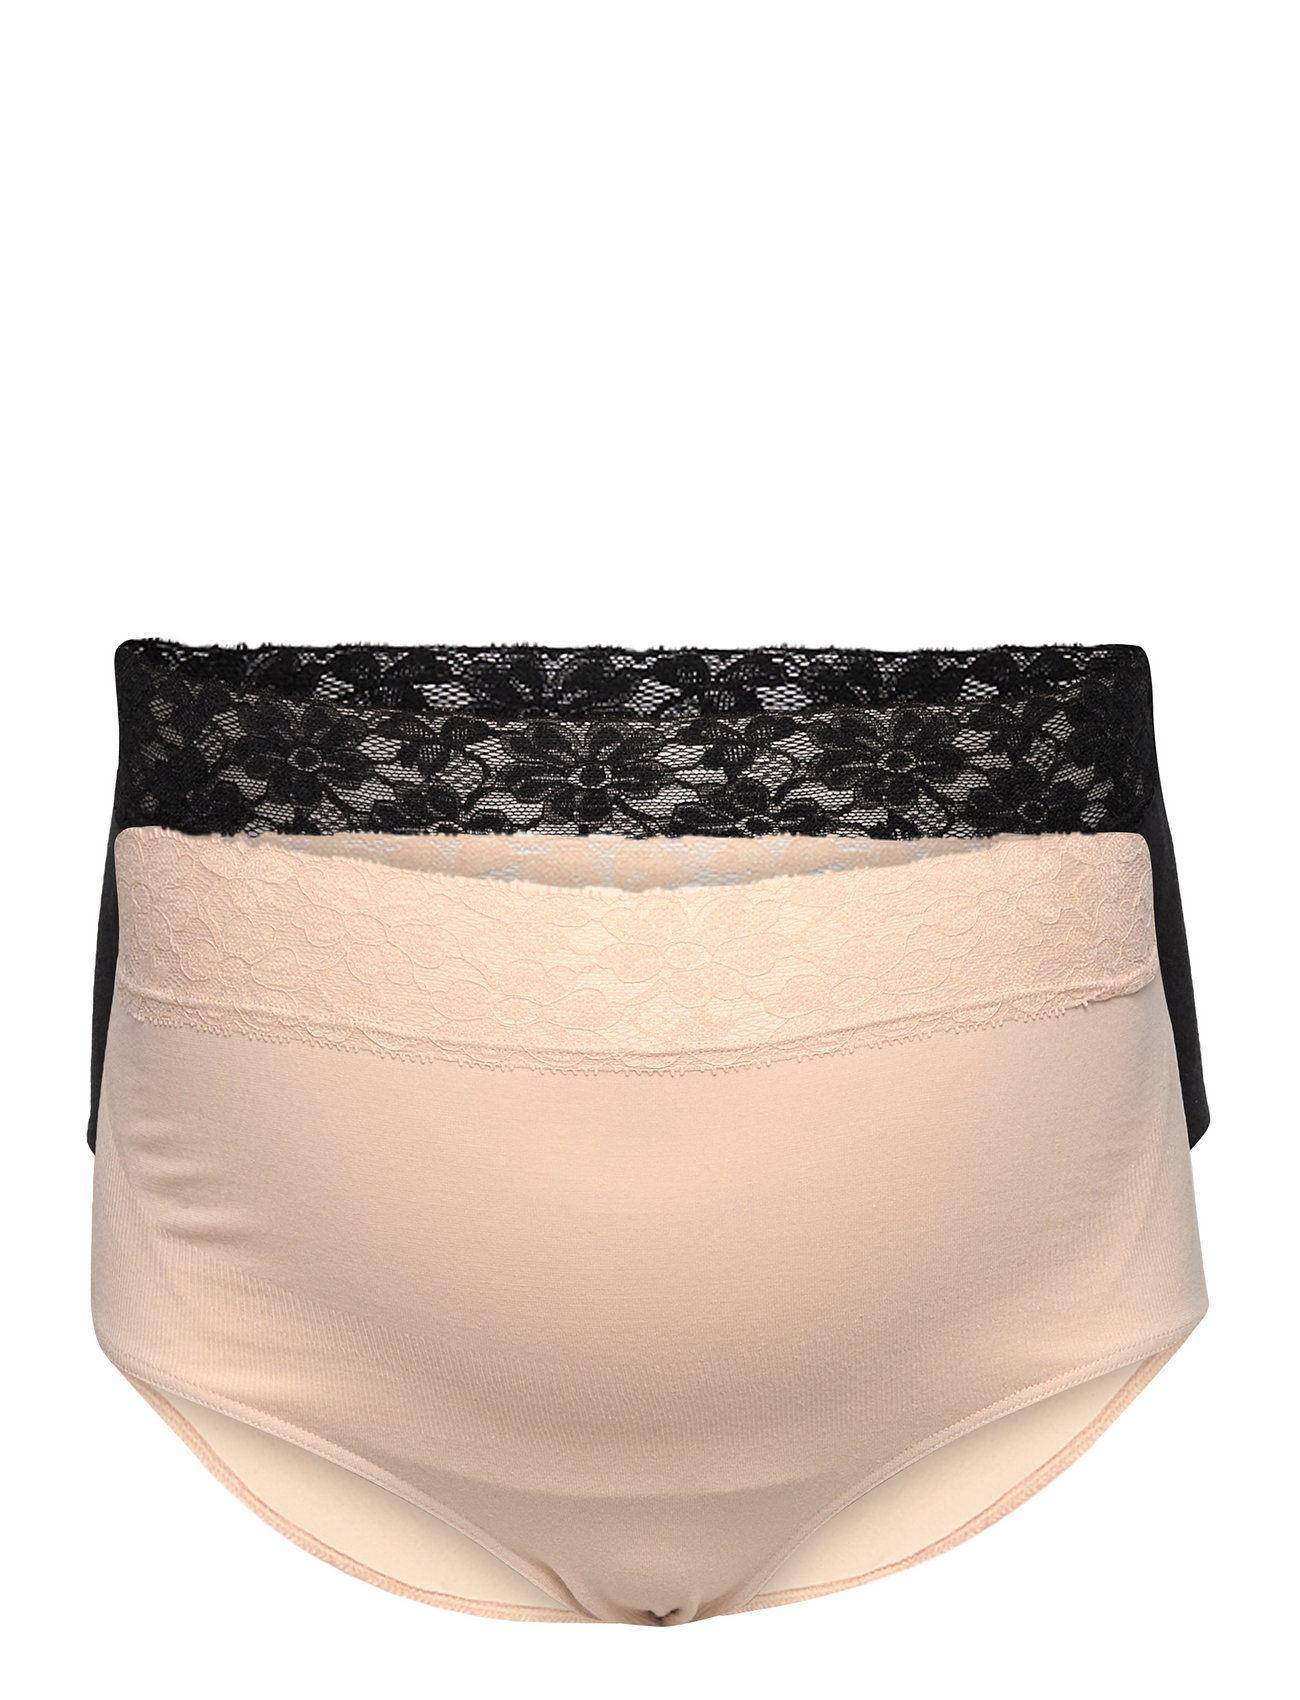 Buy MAMALICIOUS Black Maternity Knickers 2 Pack L/XL, Knickers